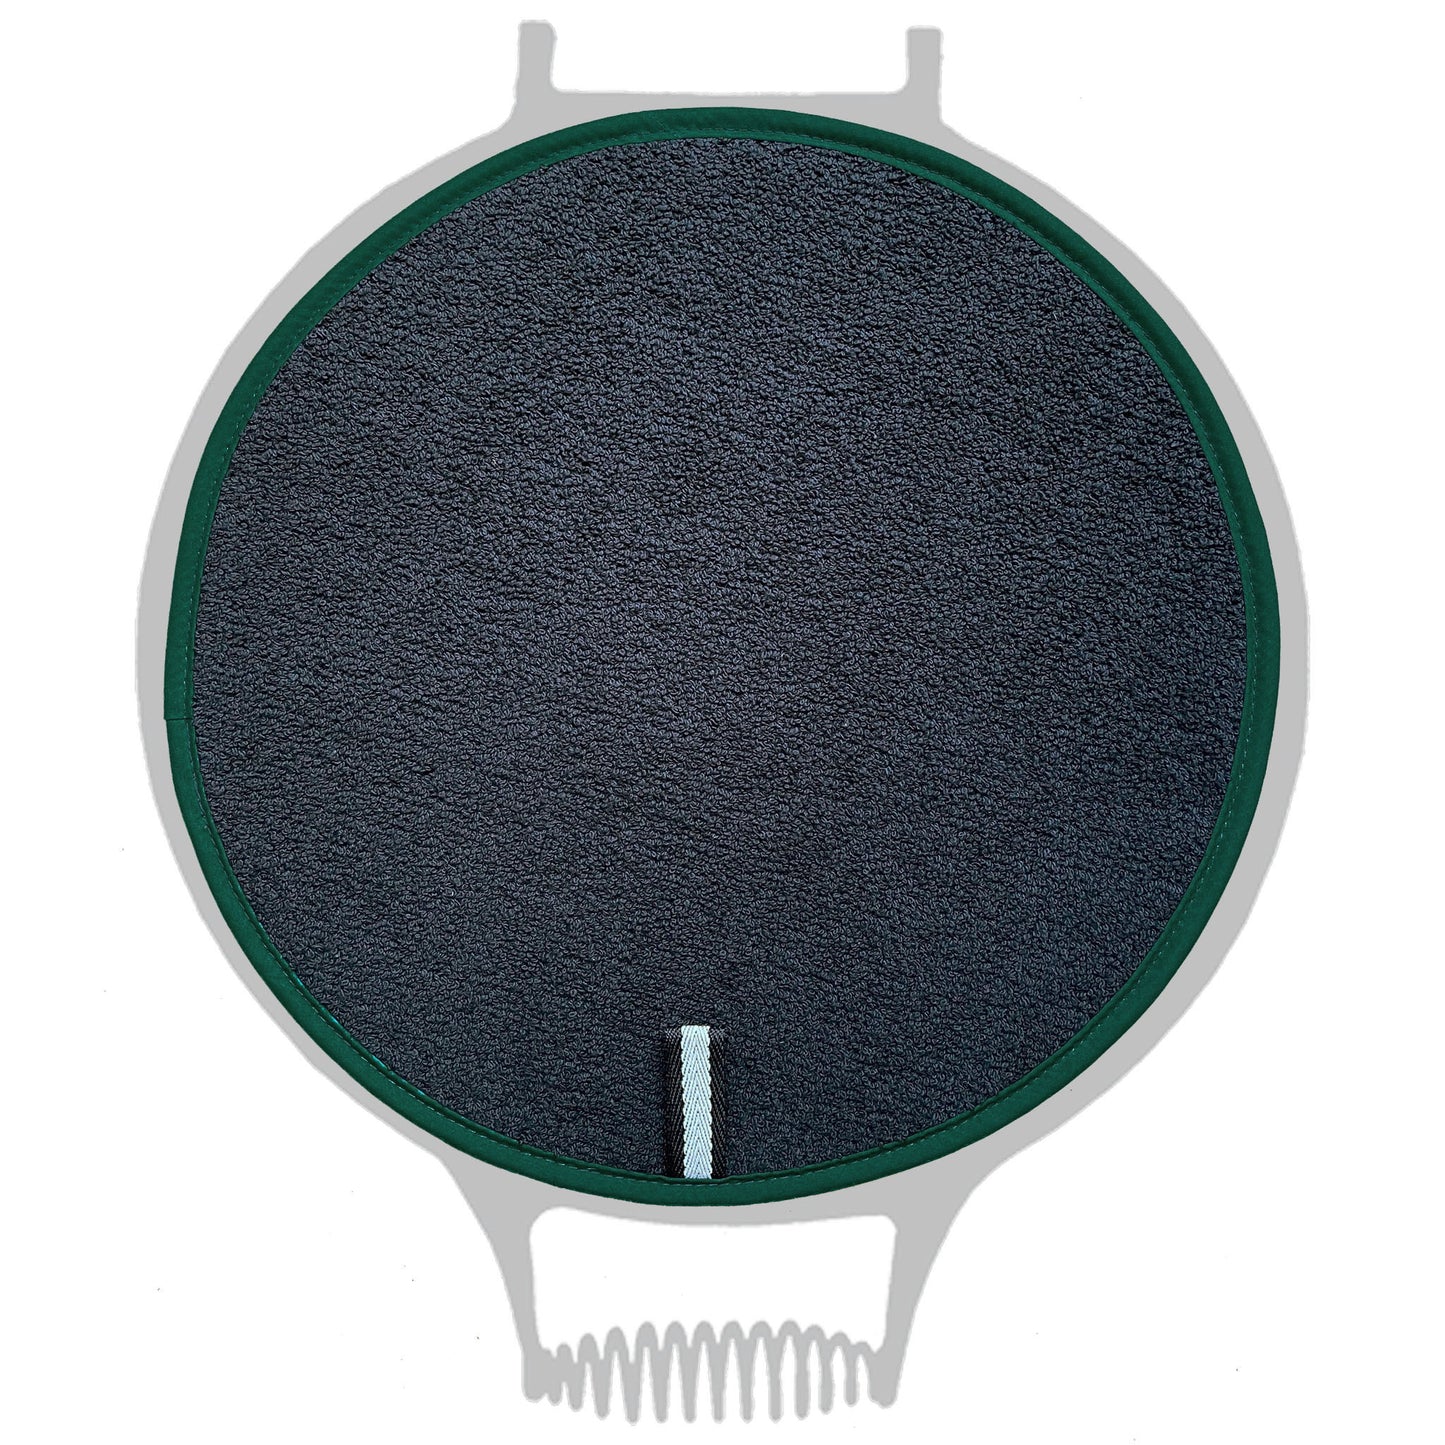 Chef Pad - Aga - The Chef Pad Shop - Insulate Range: Black & Cream Chefs Pad with Green Binding For Use With Aga Cookers